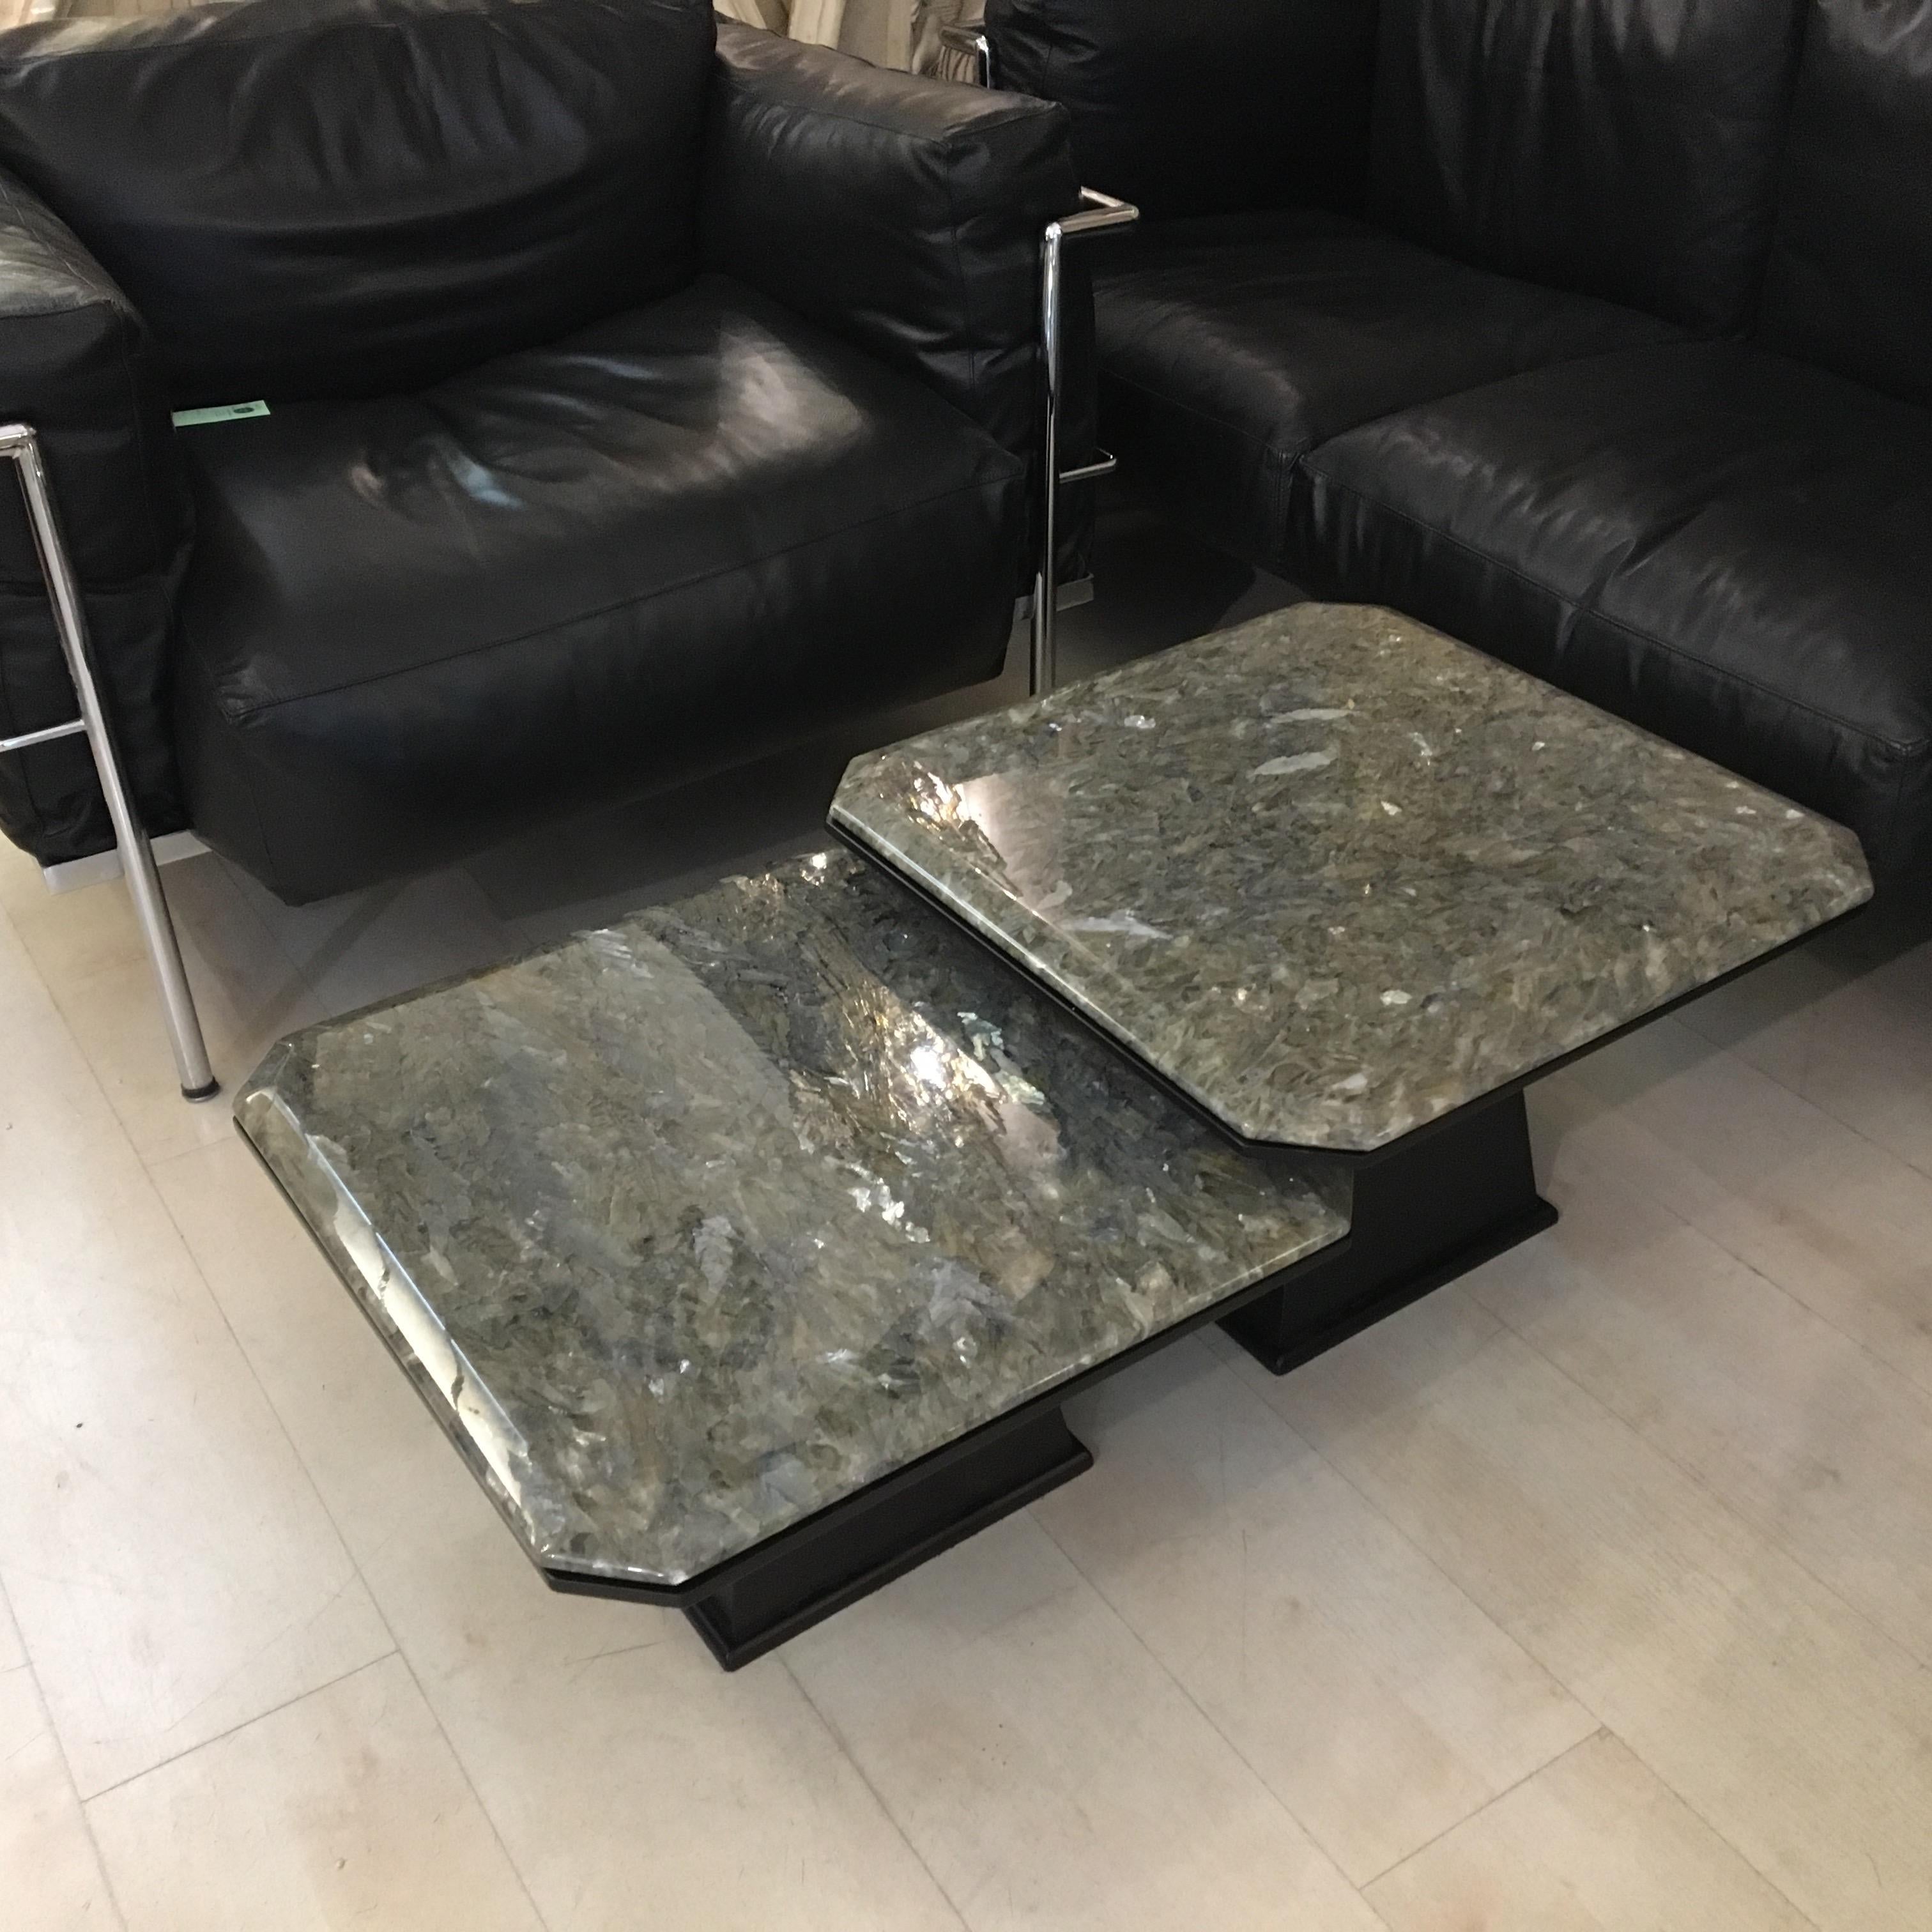 Pair of interlocking coffee tables with different heights, resin top with silver leaves effect. Base made of black lacquered wood.
1980’s
Measures: cm 55 x 55 x 28
cm 55x 55 x 35.